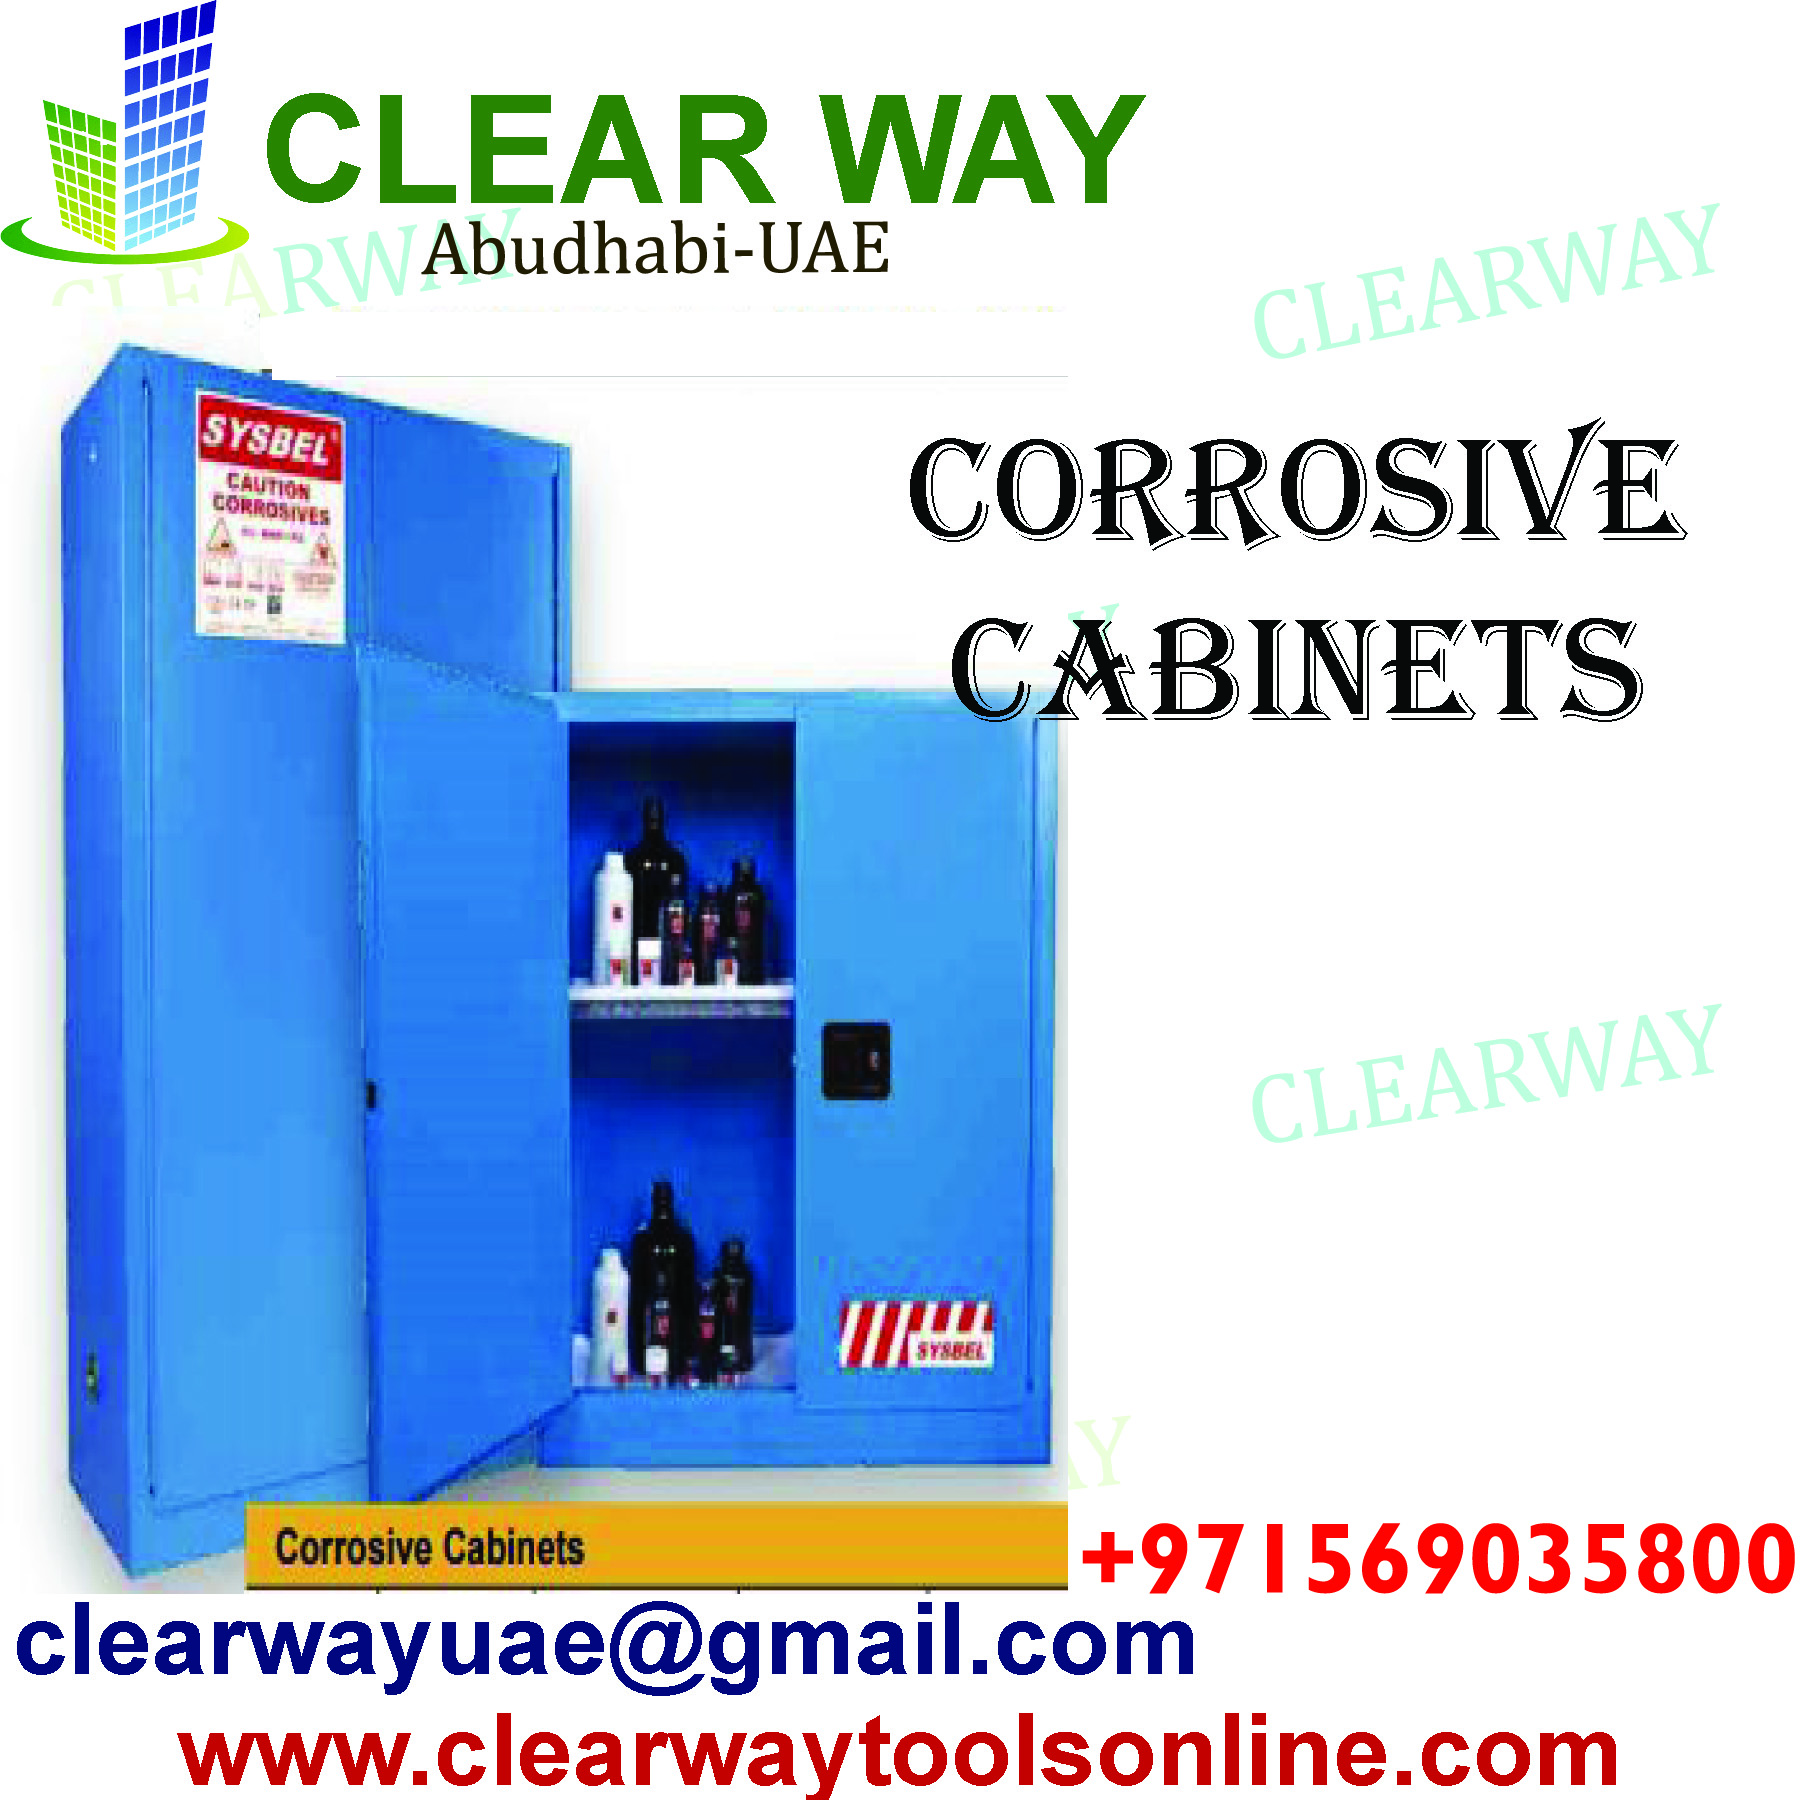 CORROSIVE CABINETS,CLEARWAY,MUSSAFAH,ABUDHABI , UAE SYSBEL